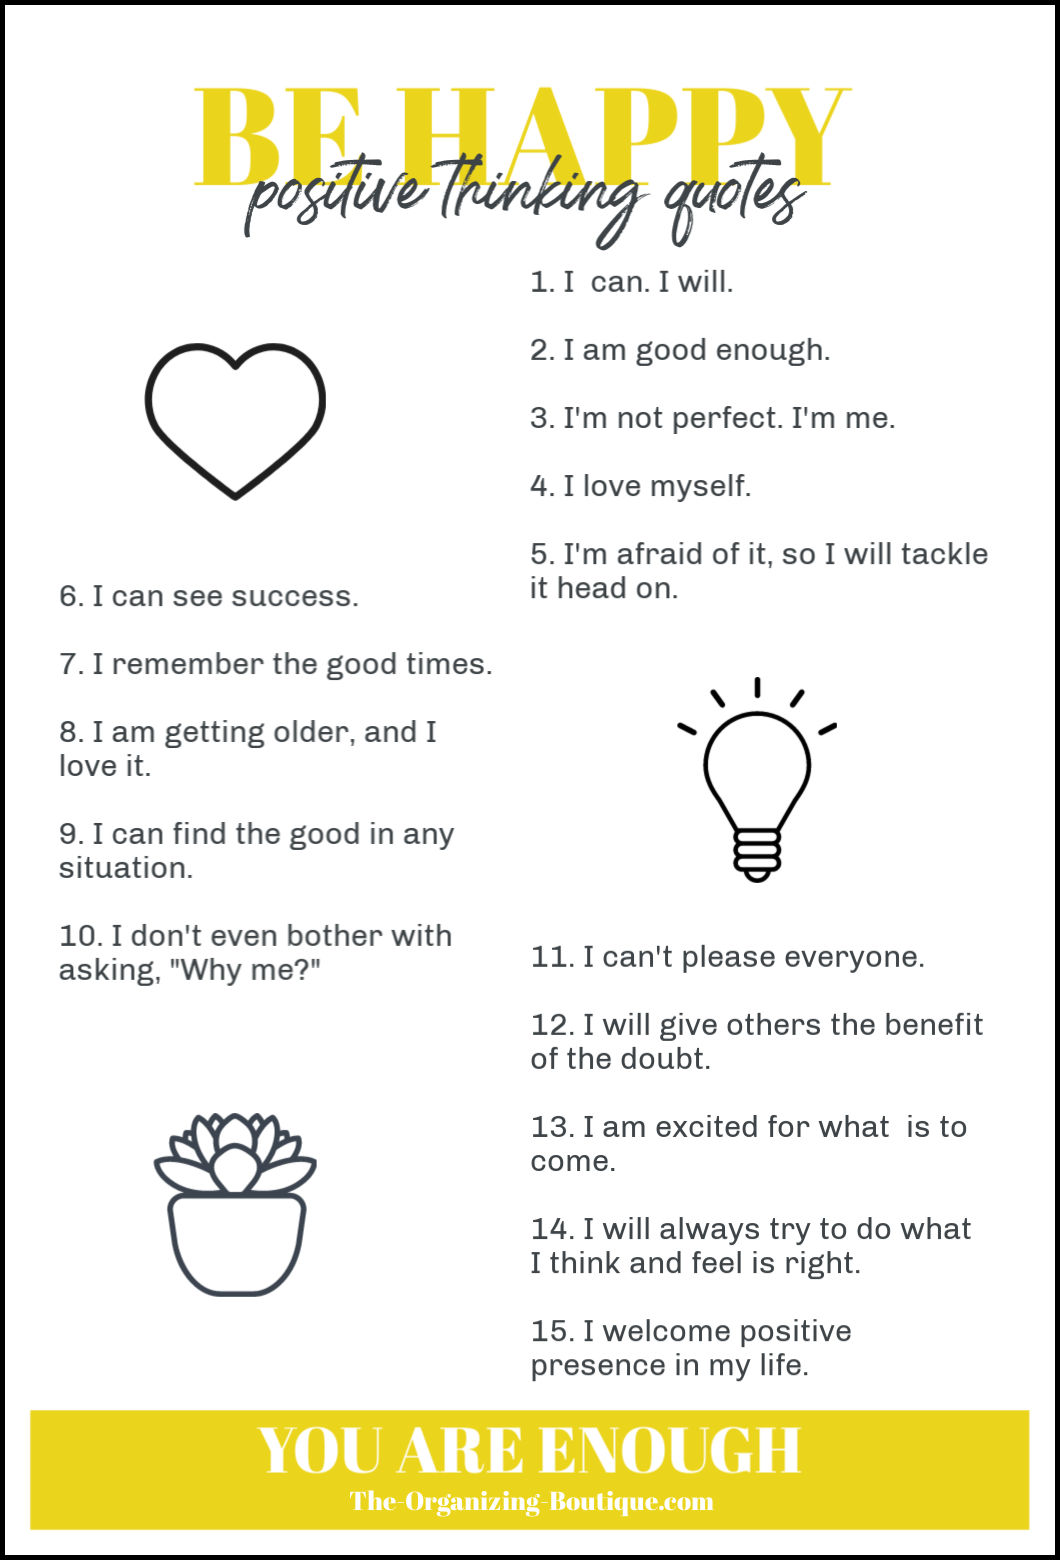 Motivational thoughts improve your quality of life a million times over. Here are some great positive thinking quotes!